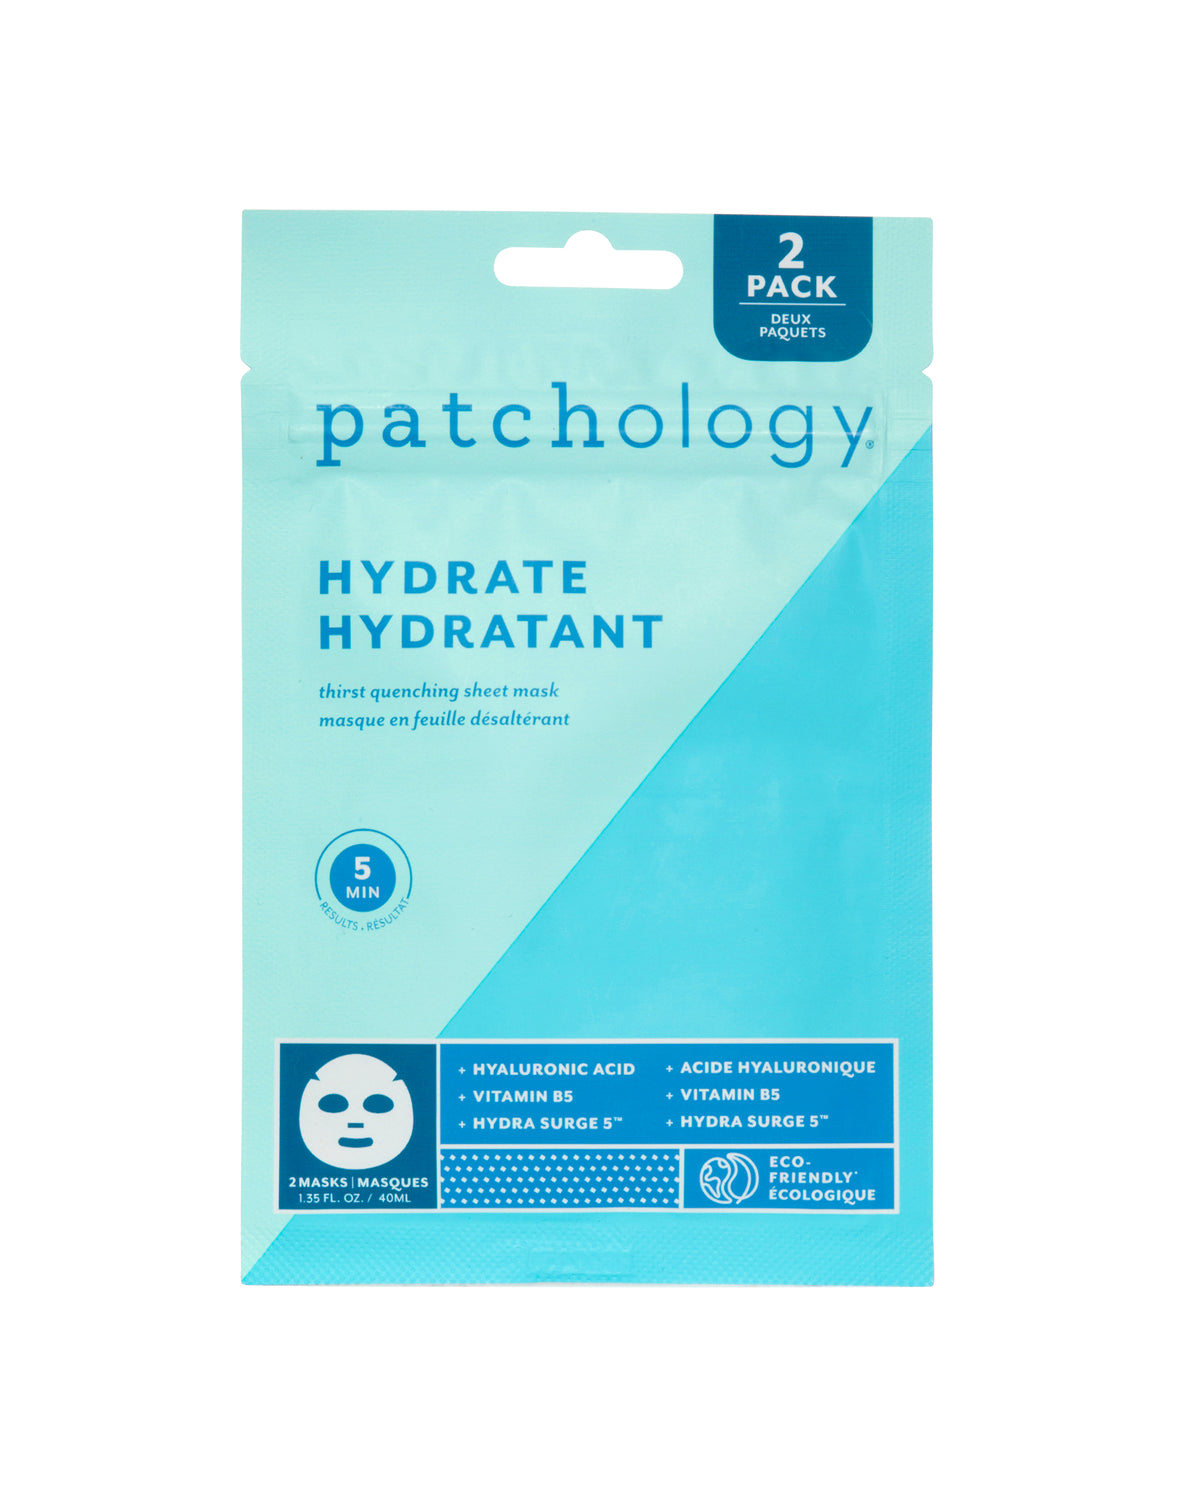 Patchology FlashMasque Hydrate 5 Minute Sheet Mask